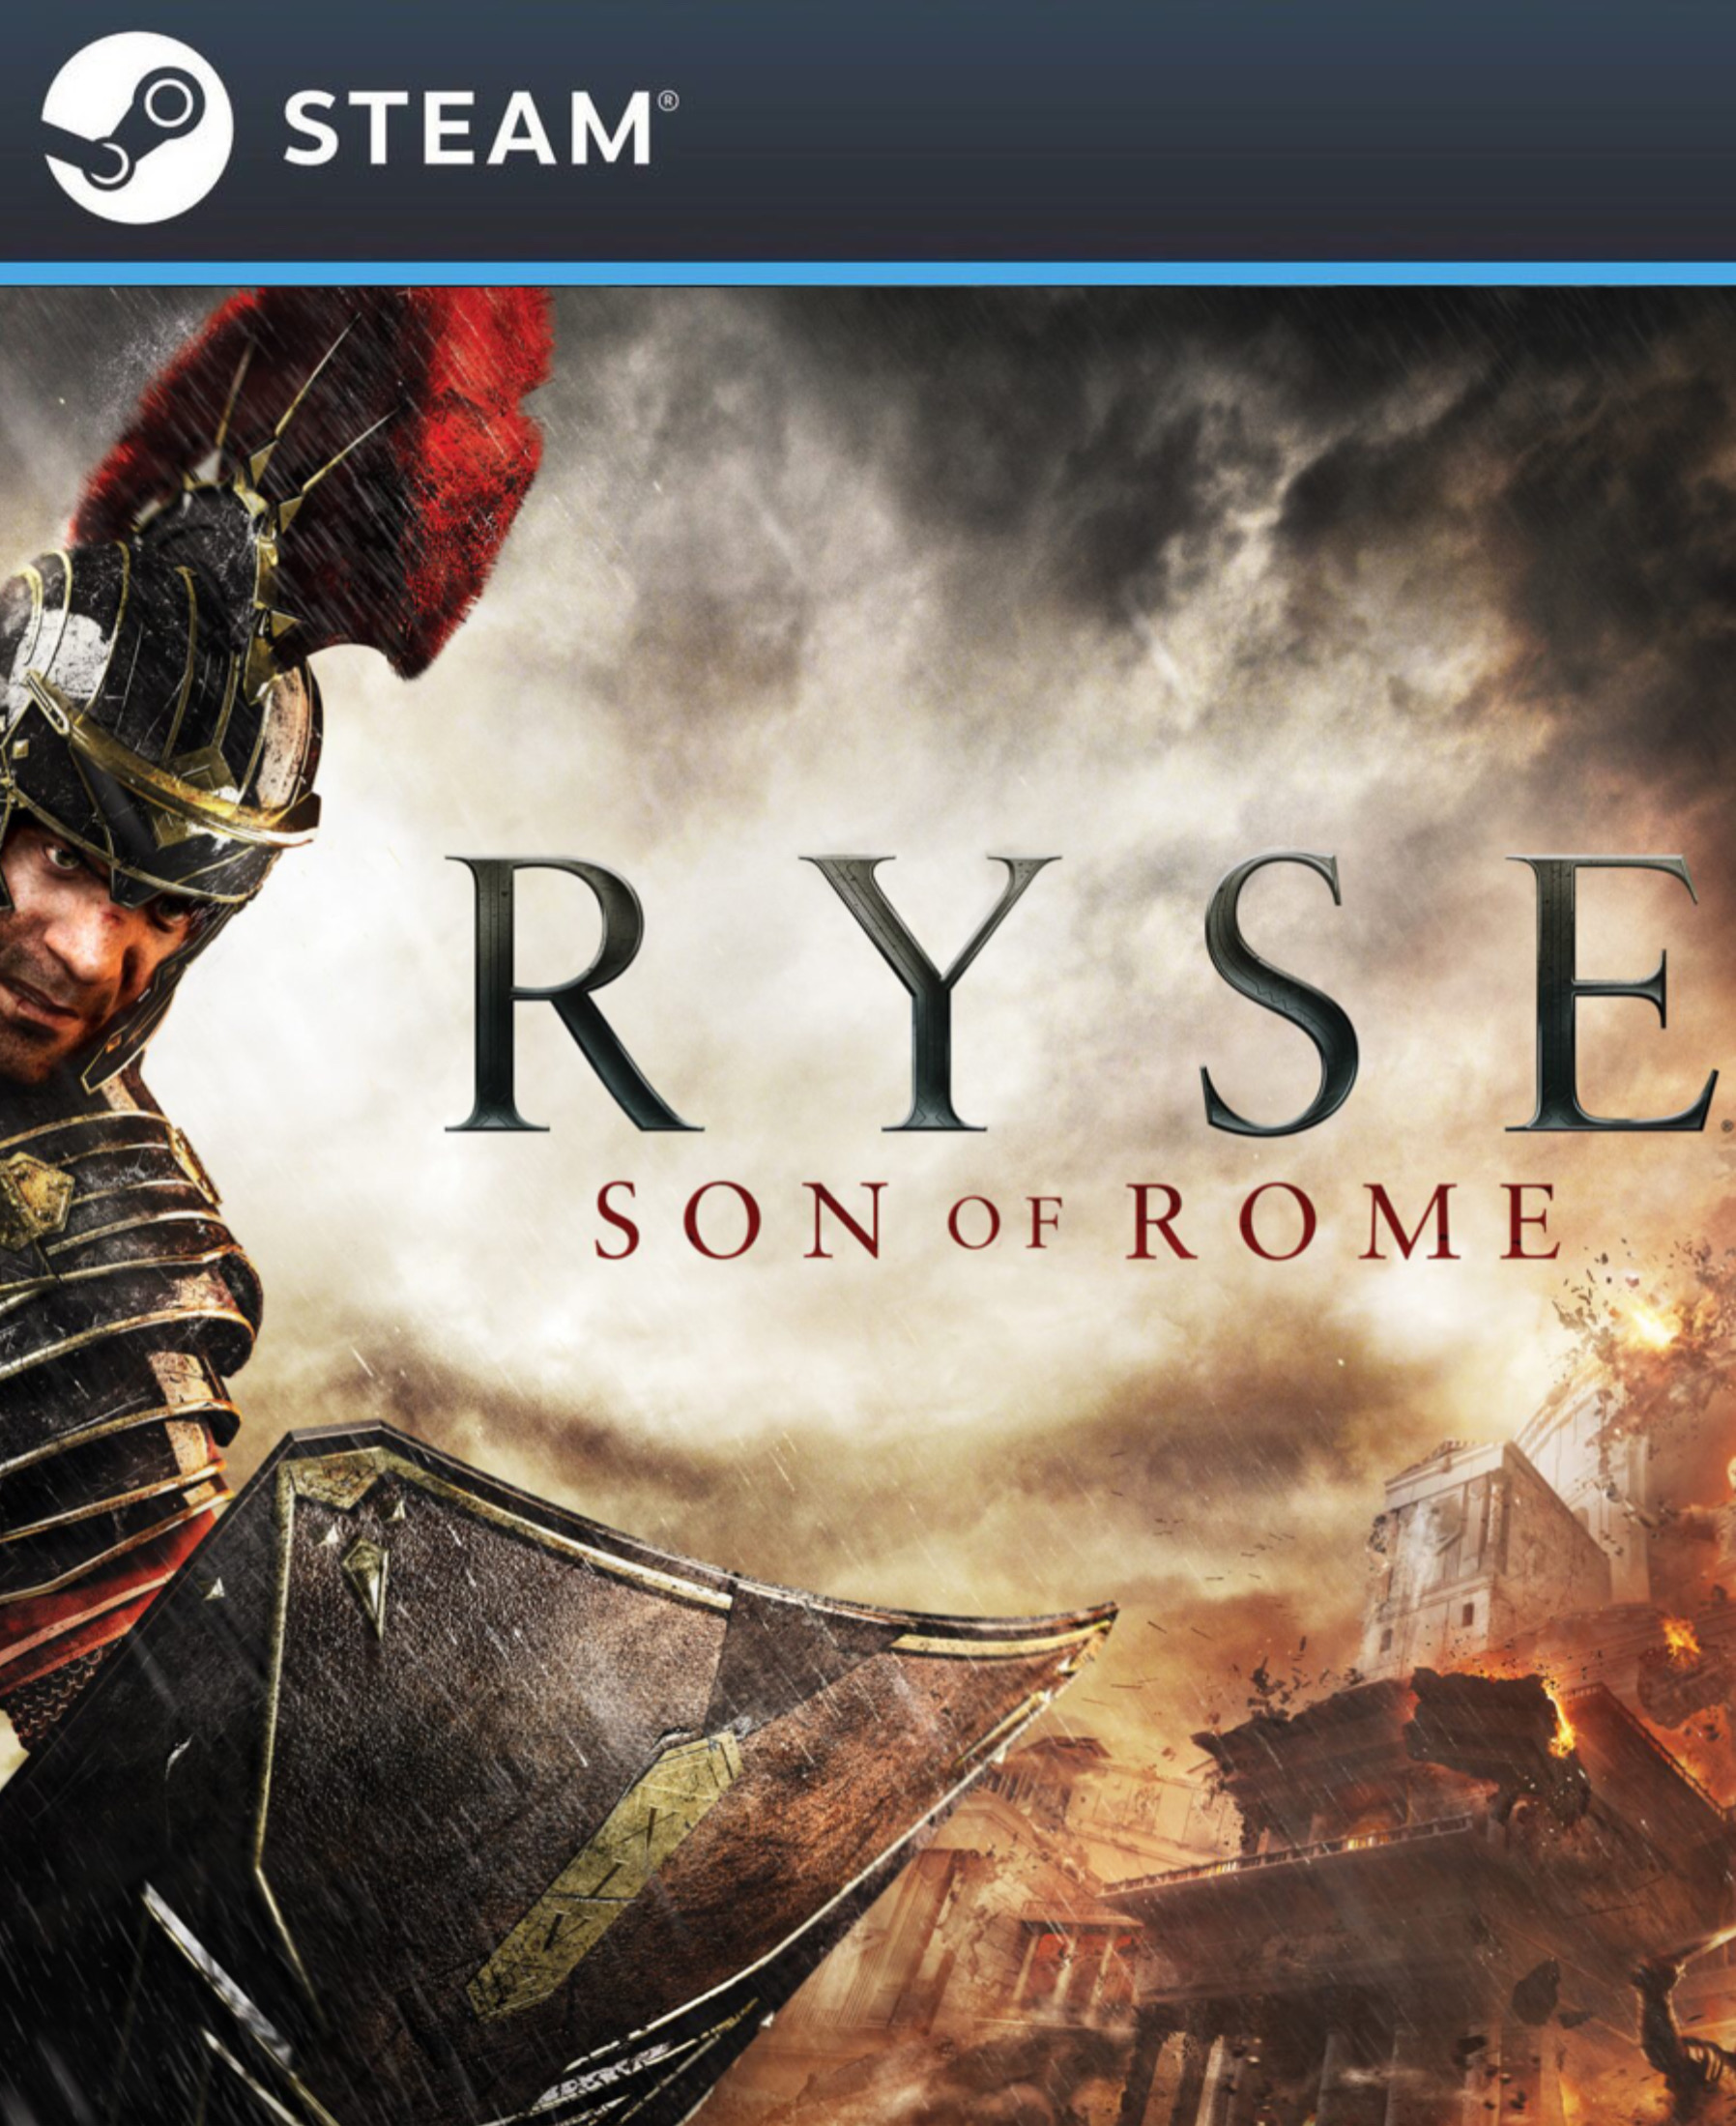 Ryse son of rome on steam фото 91